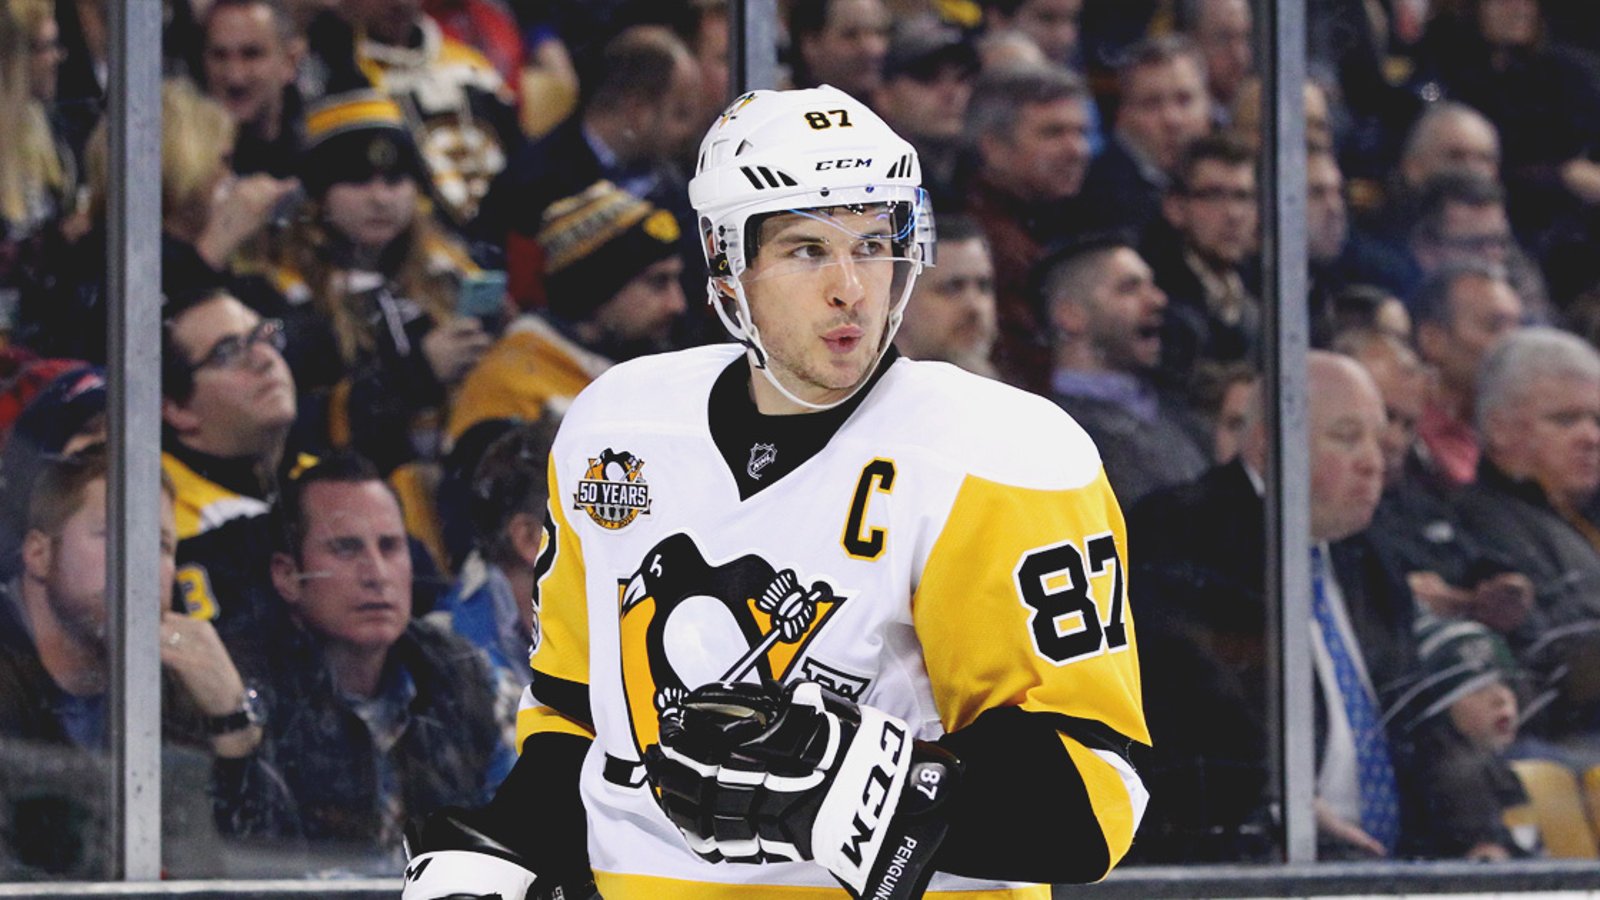 Could Sidney Crosby be sued by his own organization, the Pittsburgh Penguins?